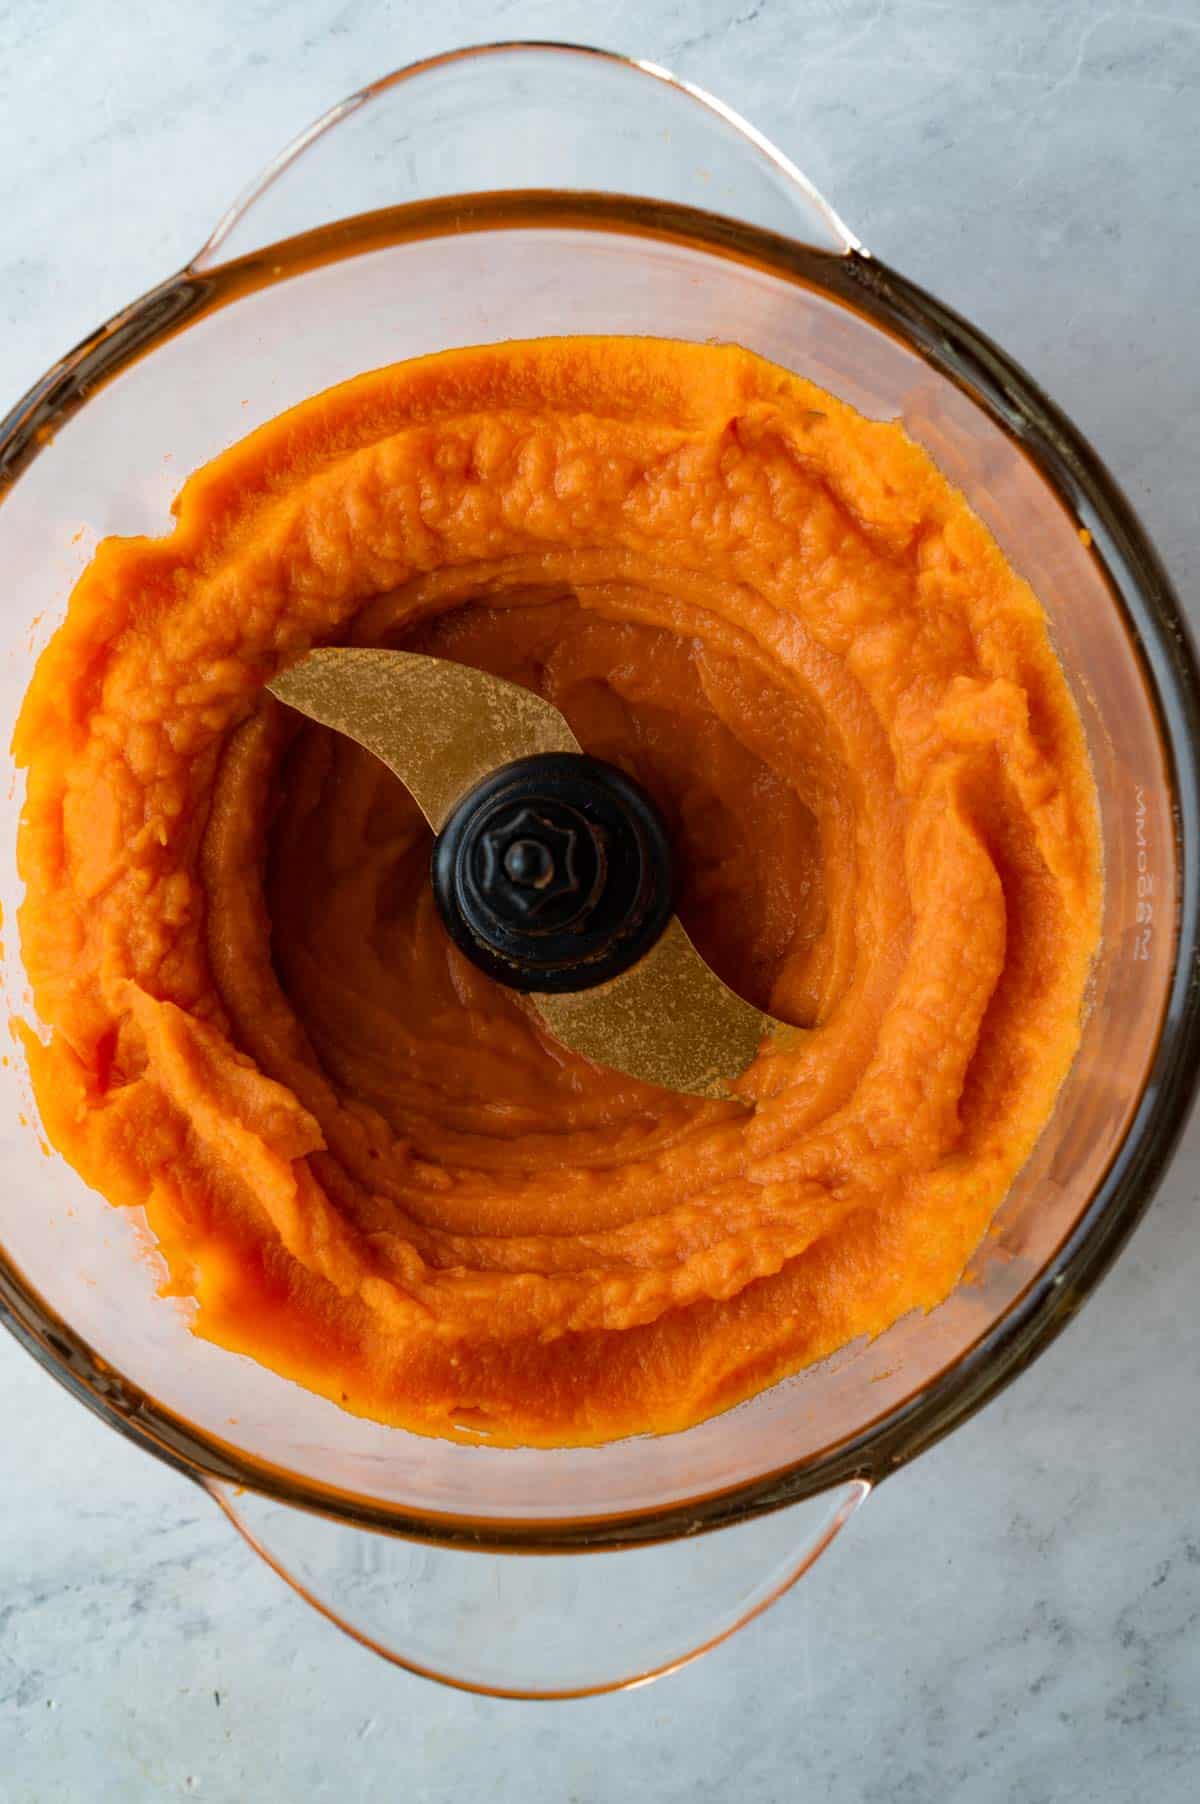 Pureed sweet potato with miso in a glass canister of a food processor.